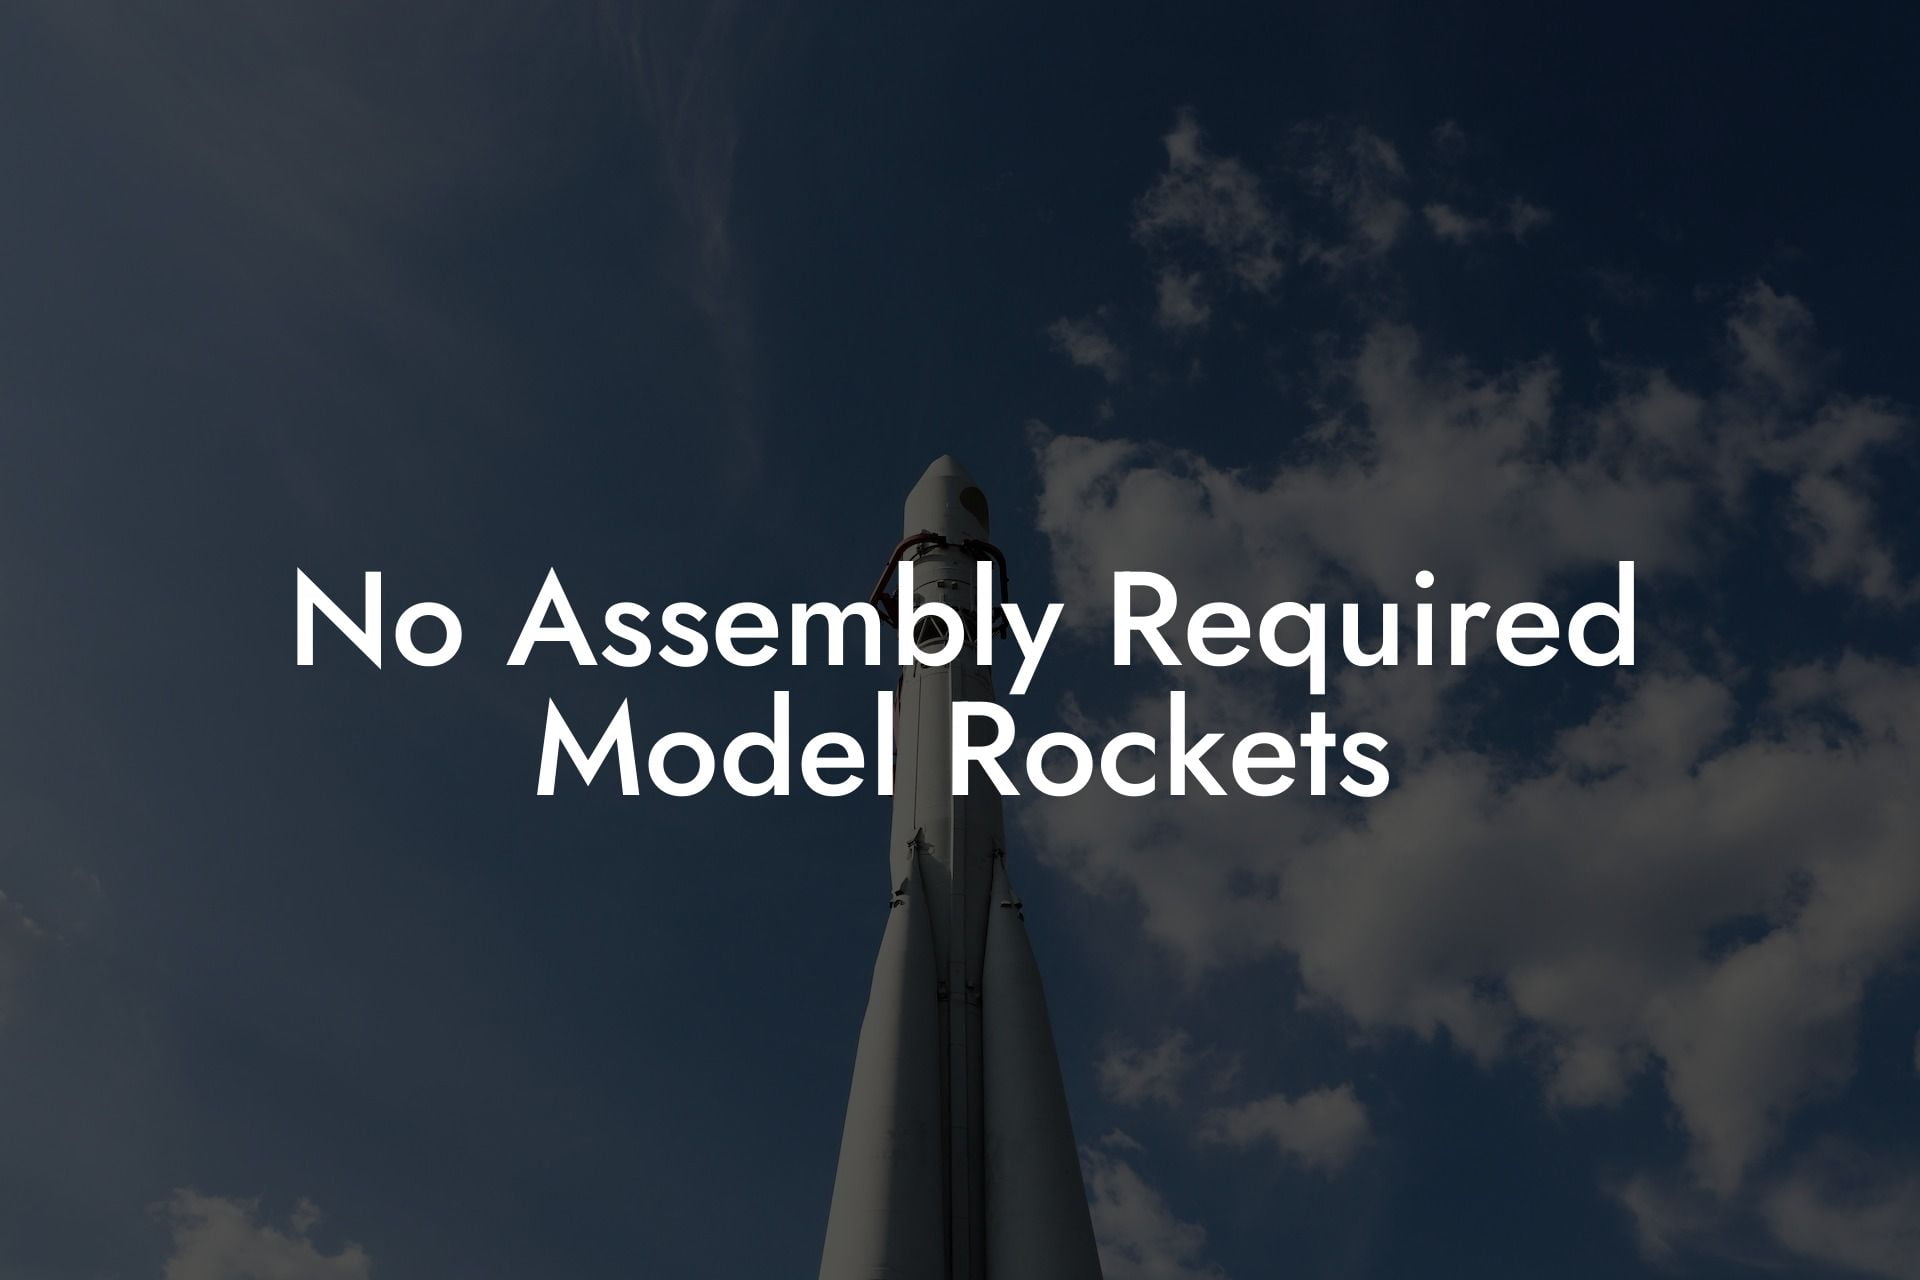 No Assembly Required Model Rockets